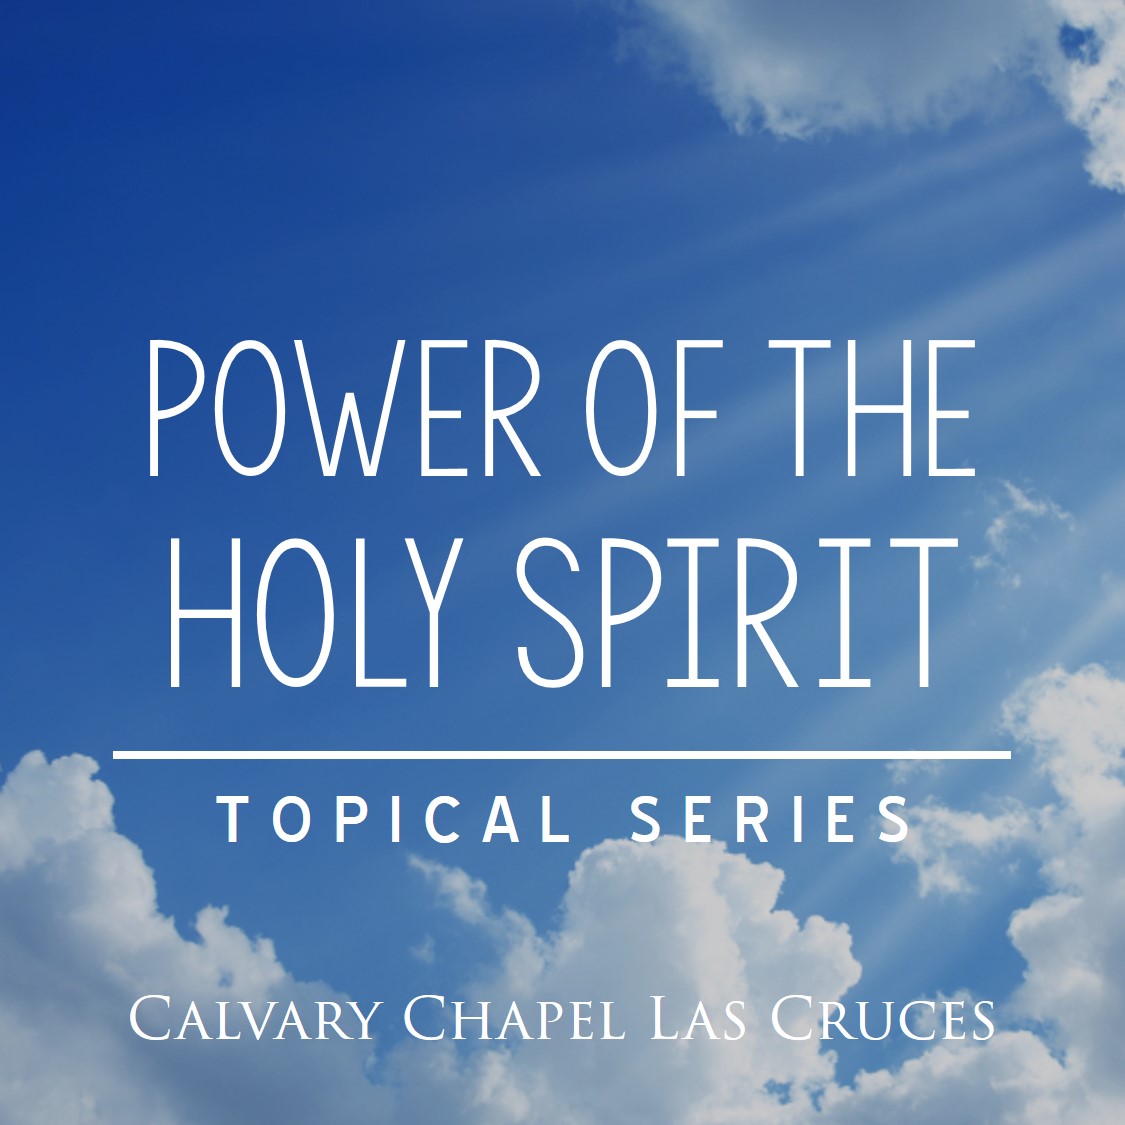 The Power of the Holy Spirit, Part 6